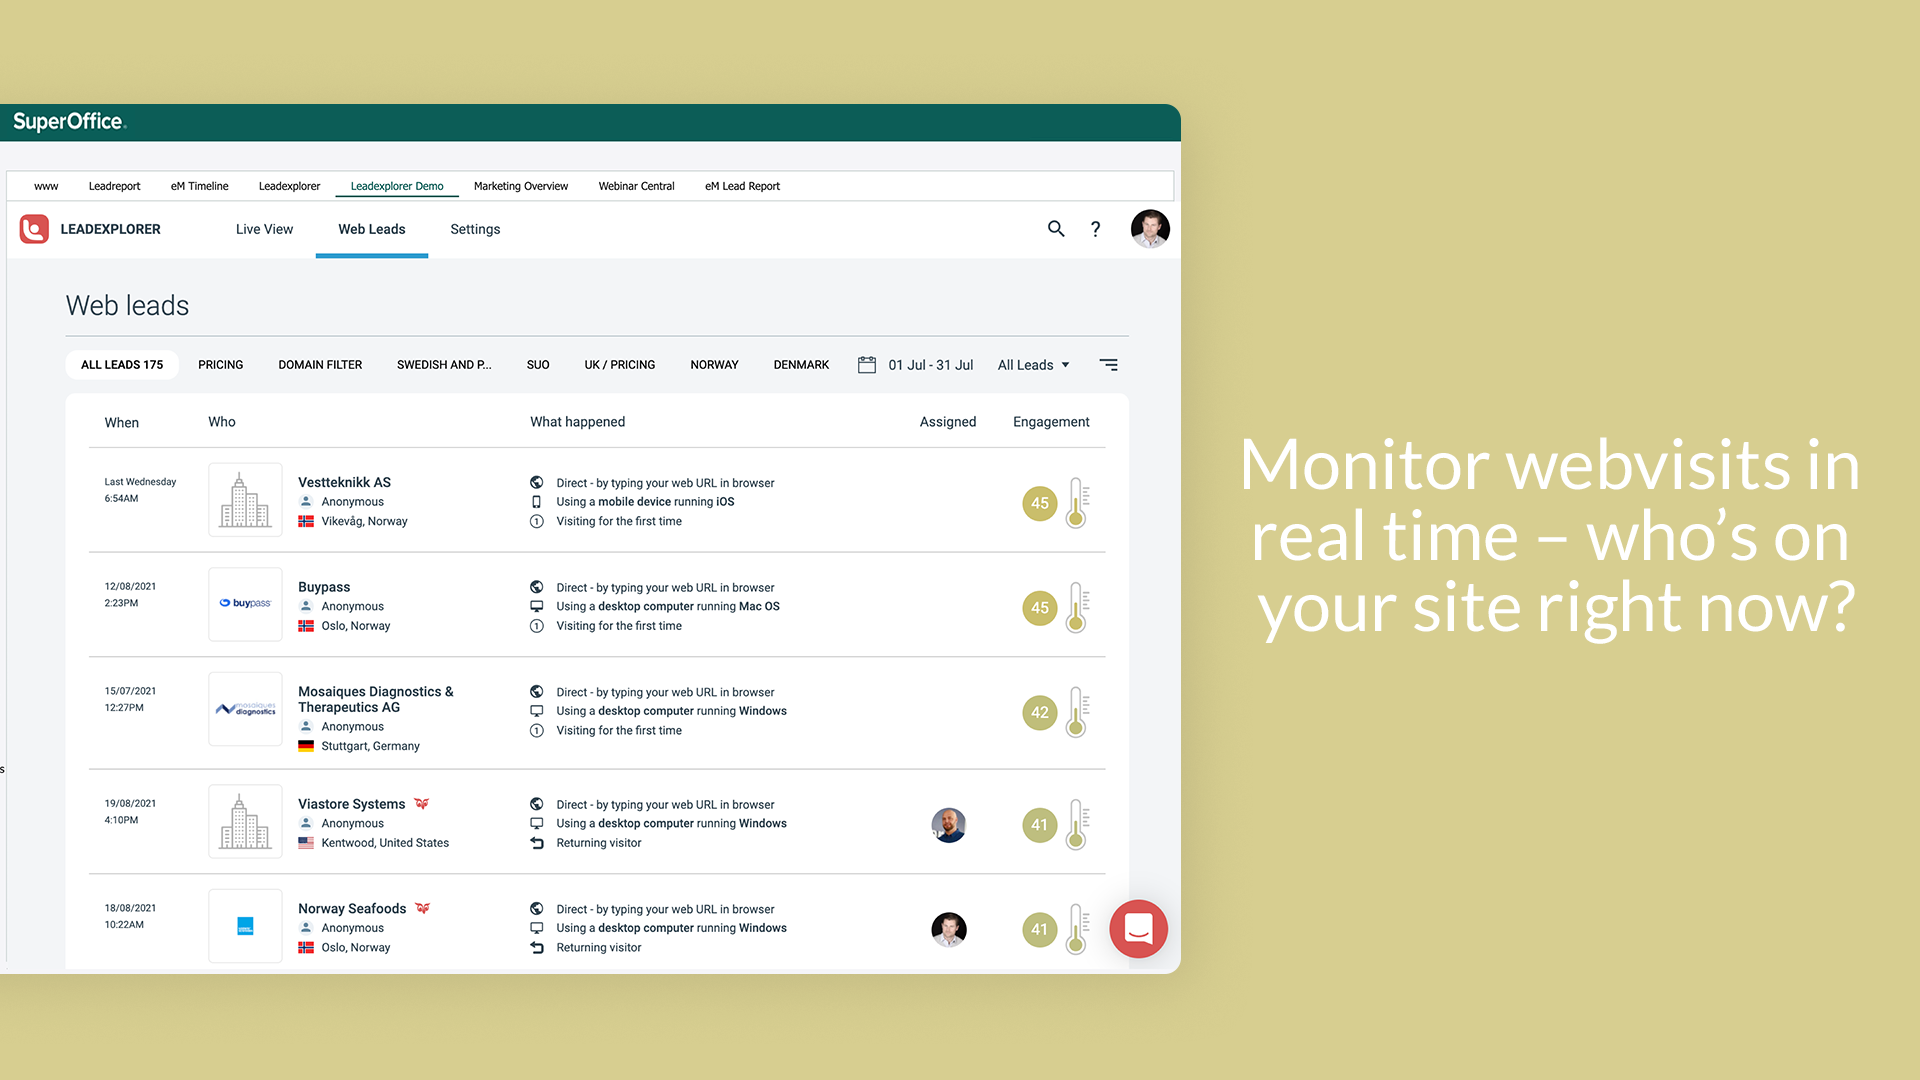 Monitor webvisits in real time – who’s on your site right now